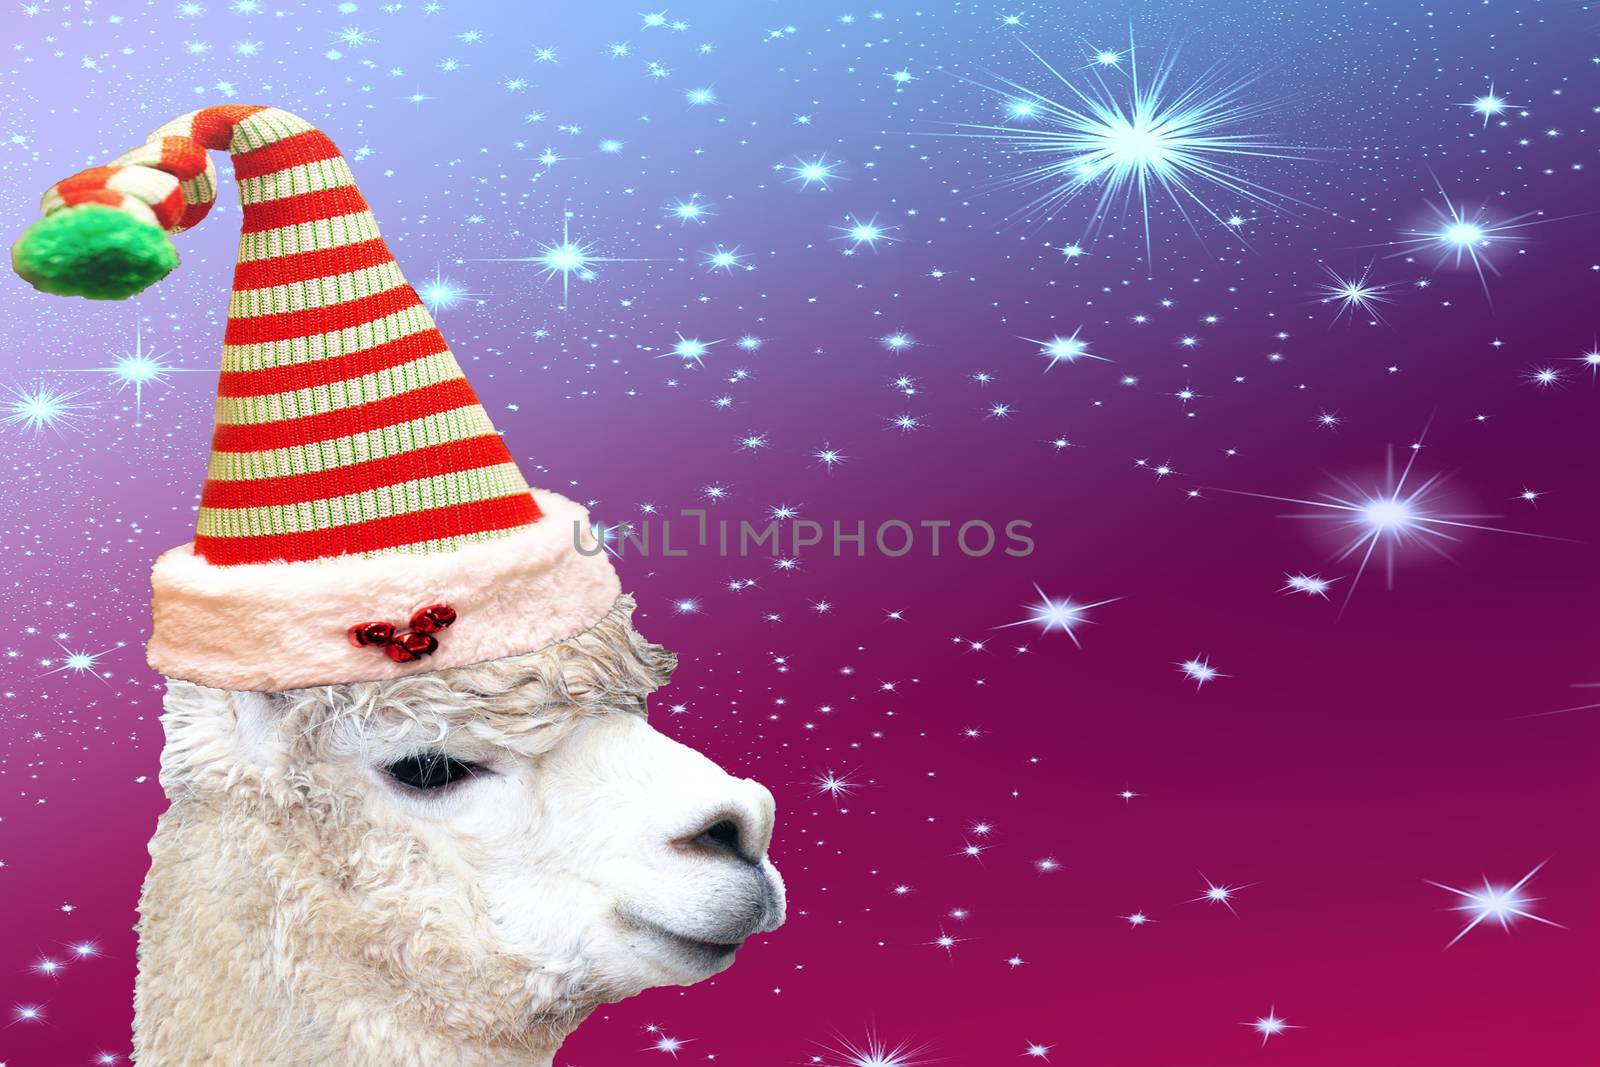 Funny christmas animal alpaca wearing a striped elf hat isolated on a colored background with stars by charlottebleijenberg